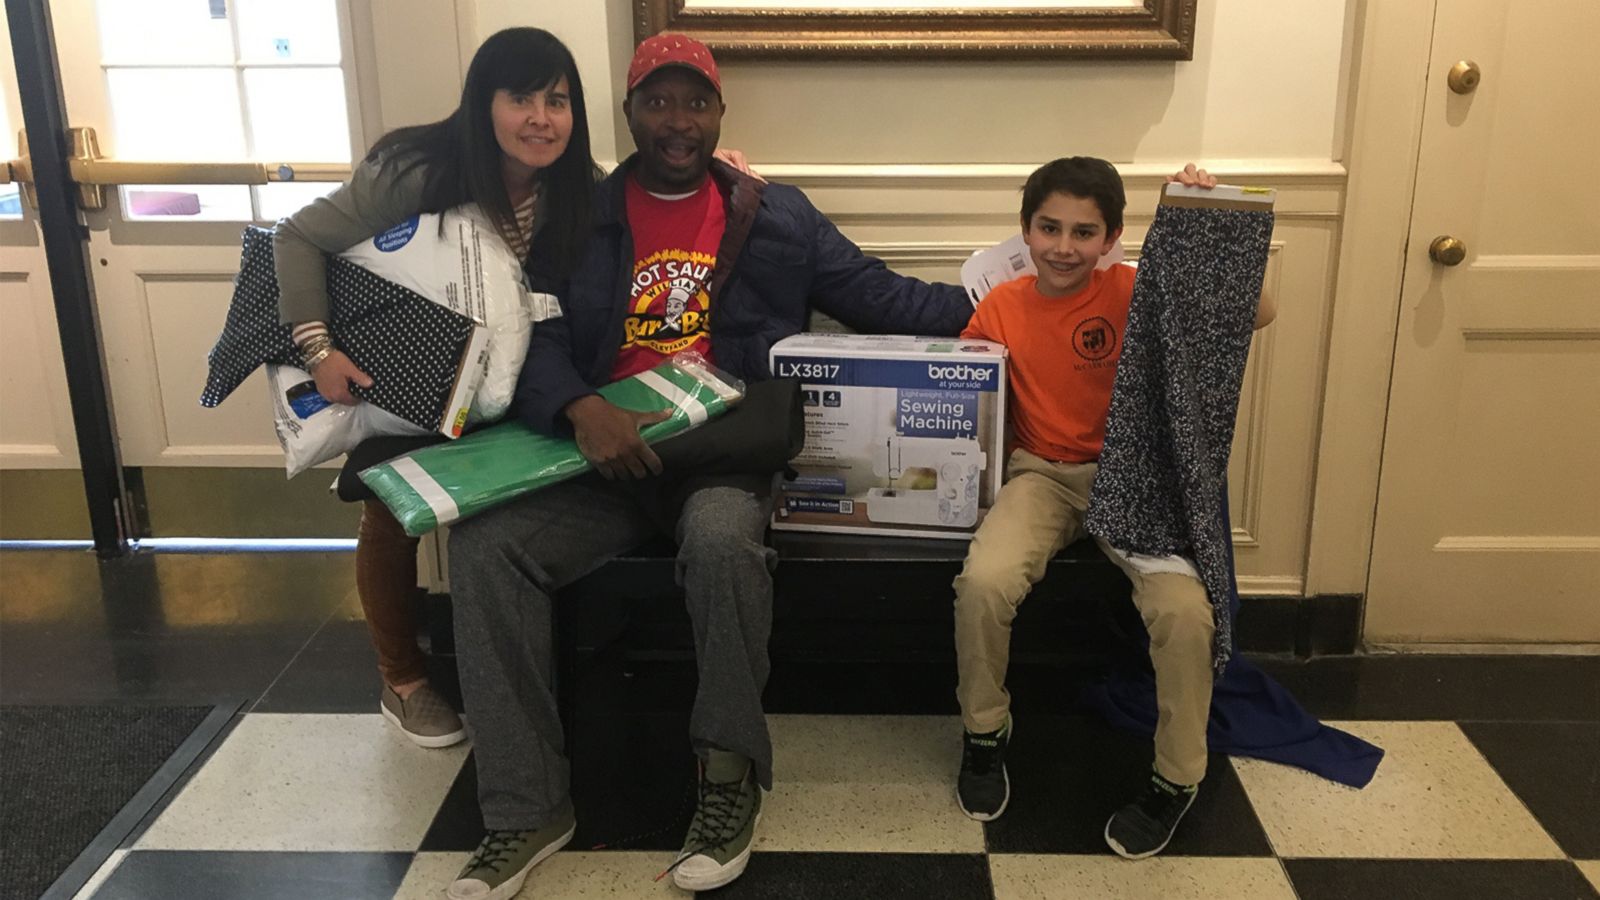 VIDEO: 10-year-old makes it his mission to help the homeless sleep comfortably